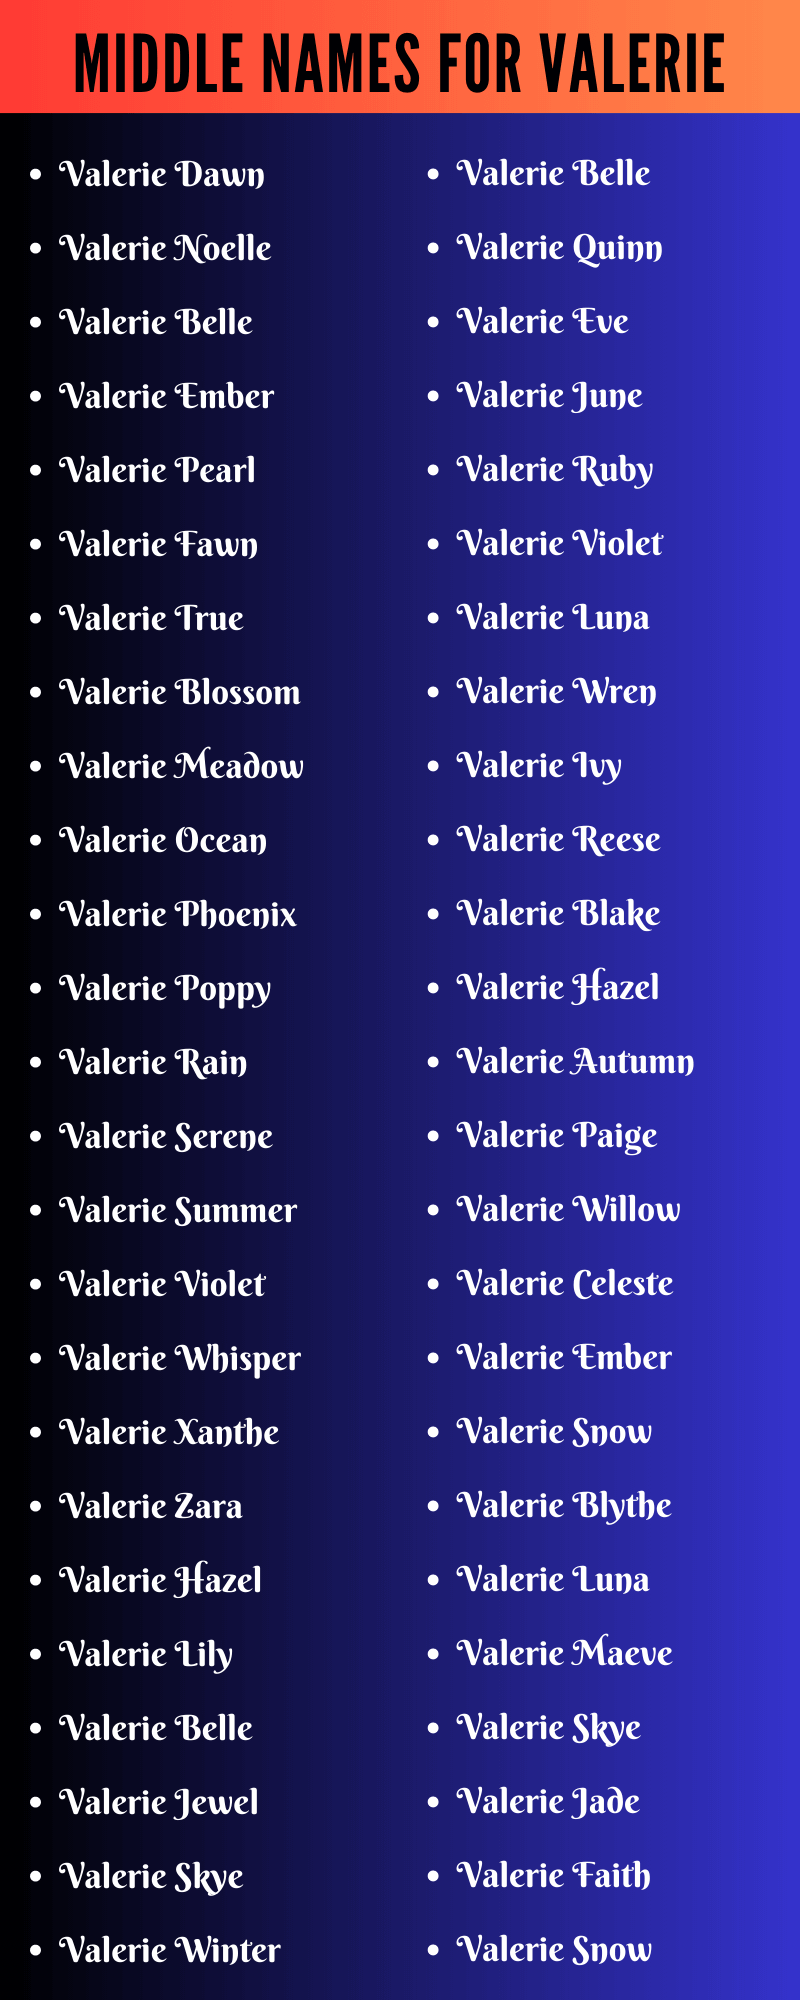 Middle Names For Valerie